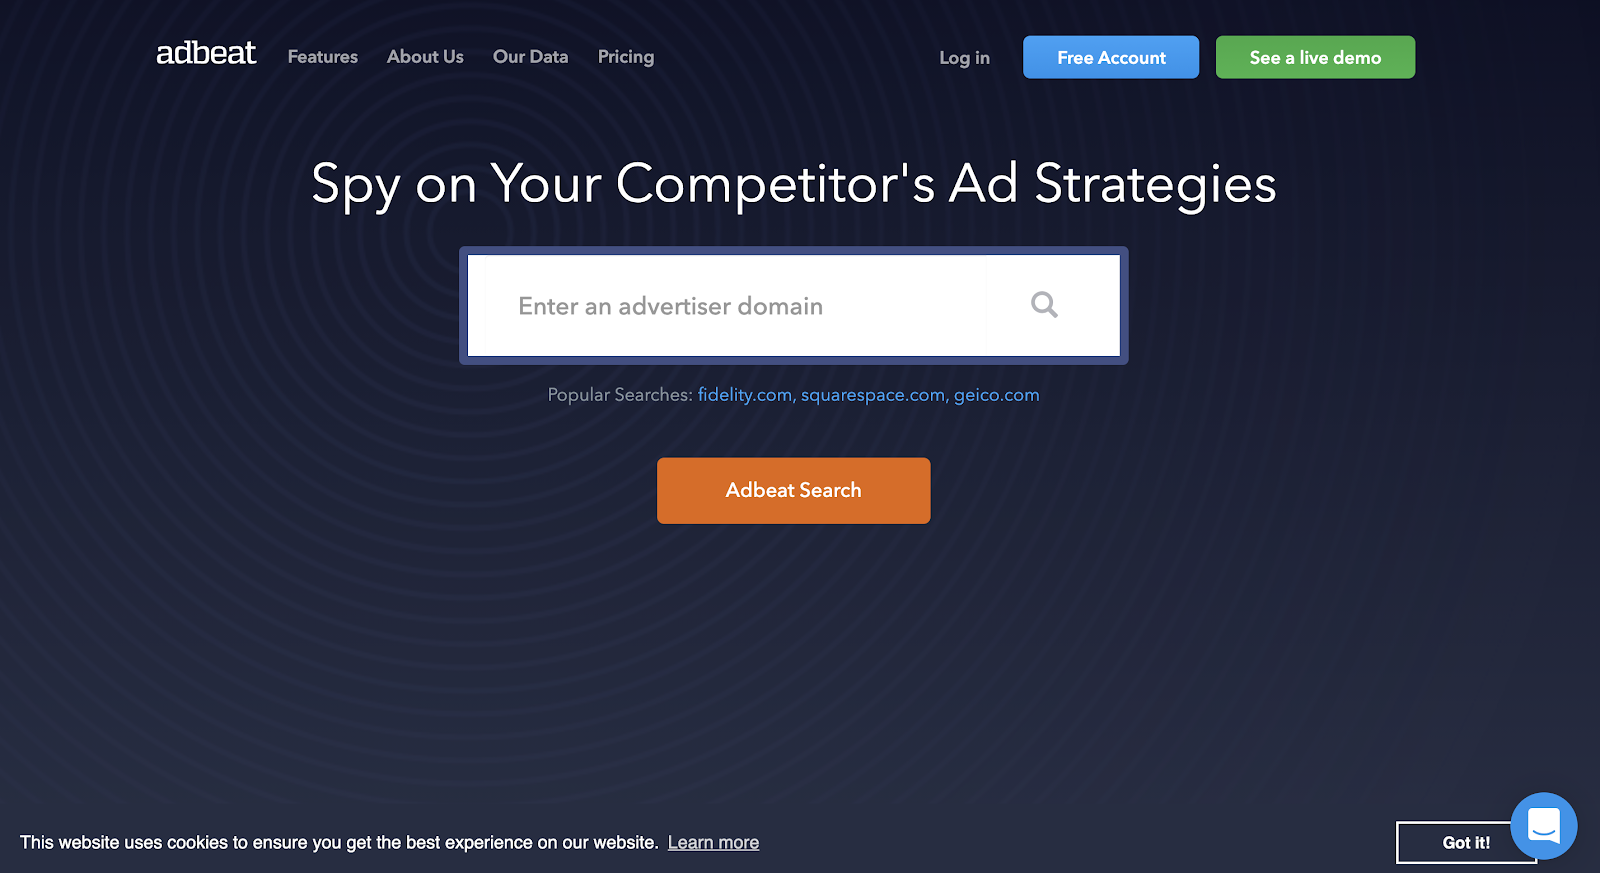 adbeat competitive analysis tool for ads